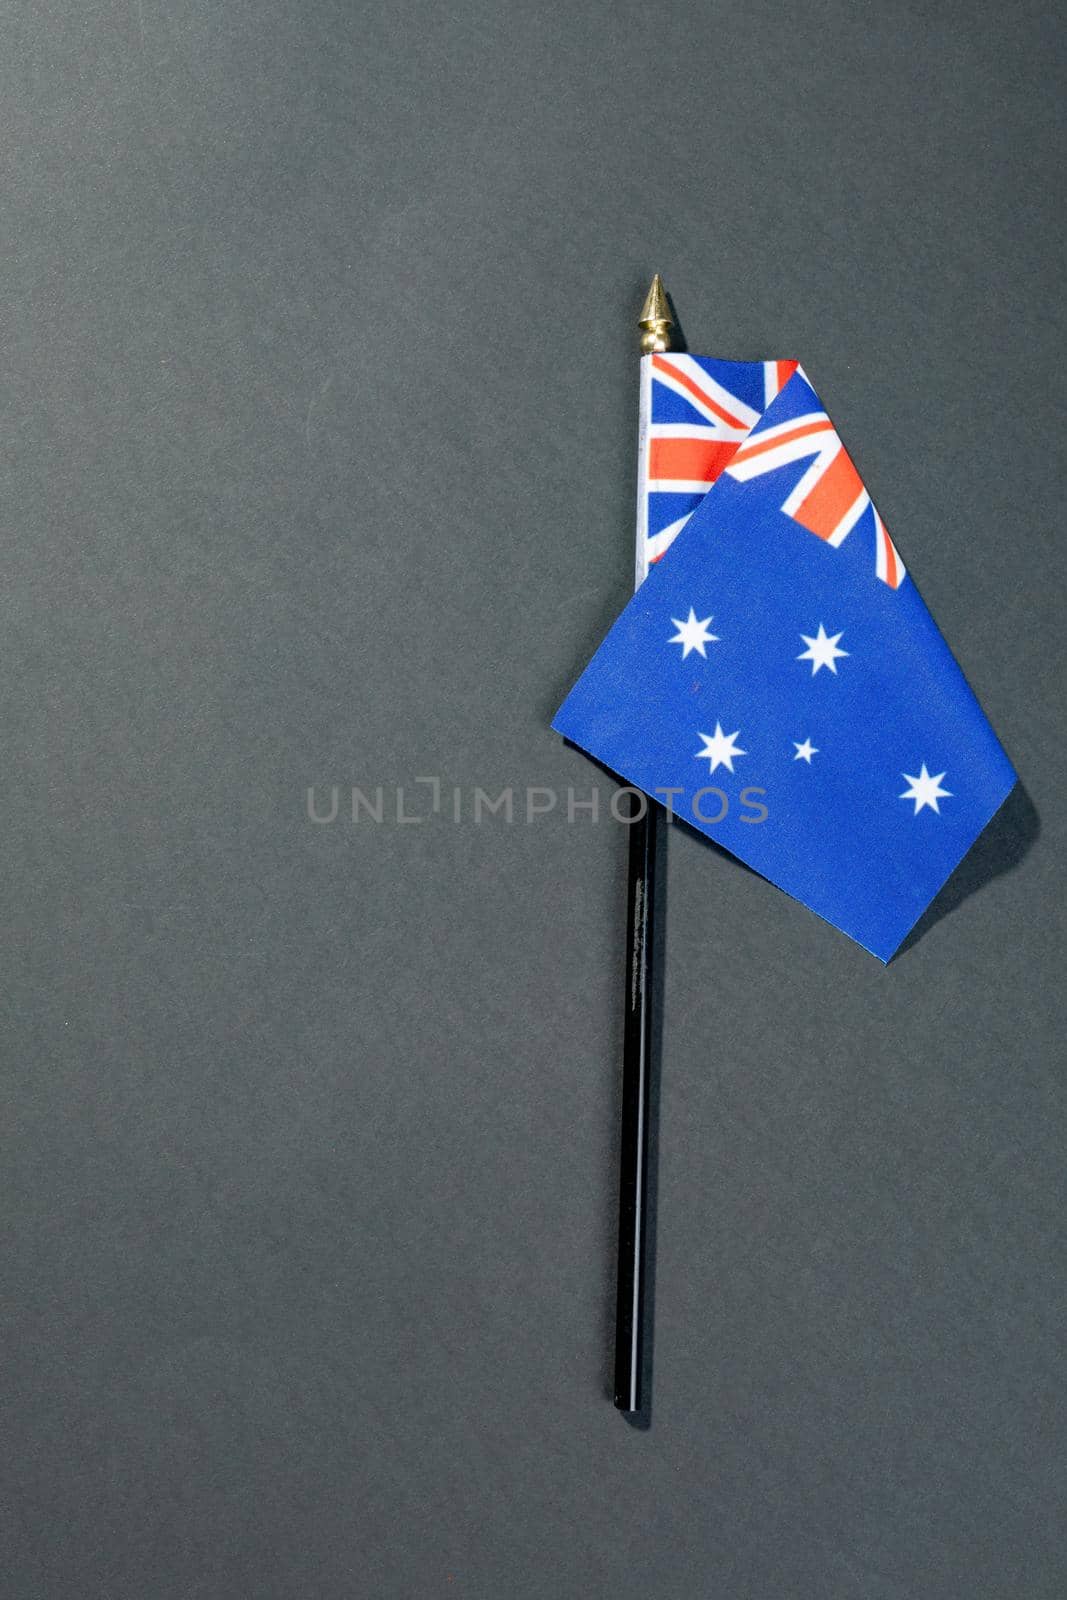 Overhead view of stars and union jack on australia flag stick by copy space over black table. patriotism, symbol and identity.